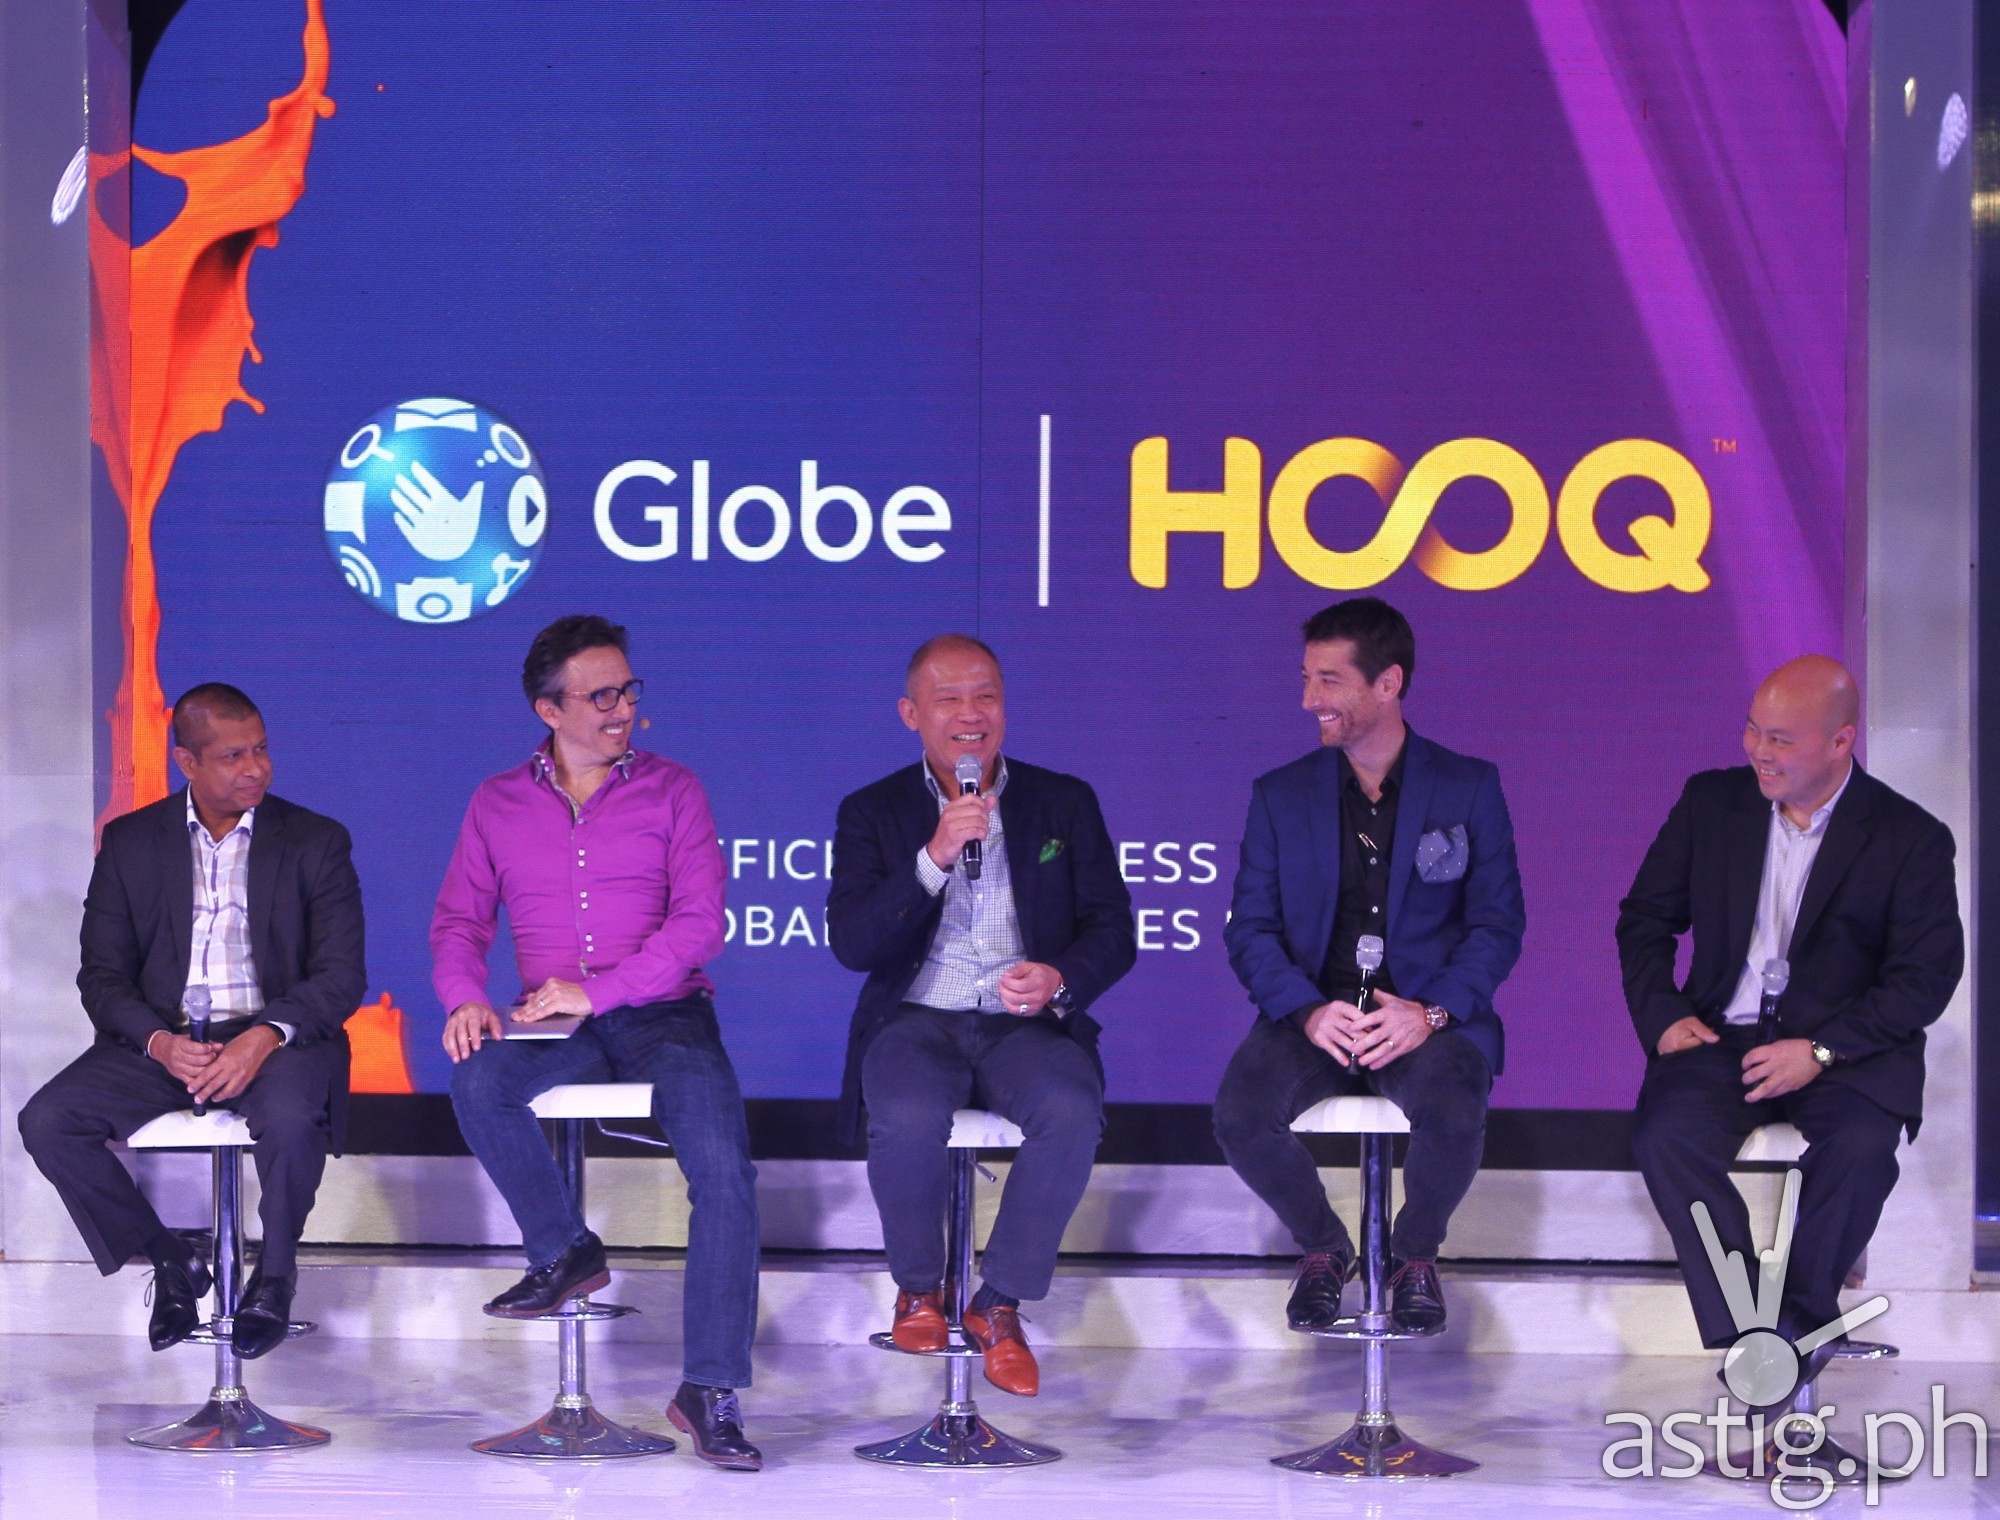 Globe executives at the official launching event of HOOQ in the Philippines [L-R] Warner Bros. Digital Distribution Vice President for Business Strategy Anuraj Shavantha Goonetilleke, HOOQ CEO Peter Bithos, Globe Telecom President and CEO Ernest Cu, Globe Telecom Senior Advisor for Consumer Business Dan Horan and Sony Pictures Executive Vice President for Networks George Chung-Chi Chien